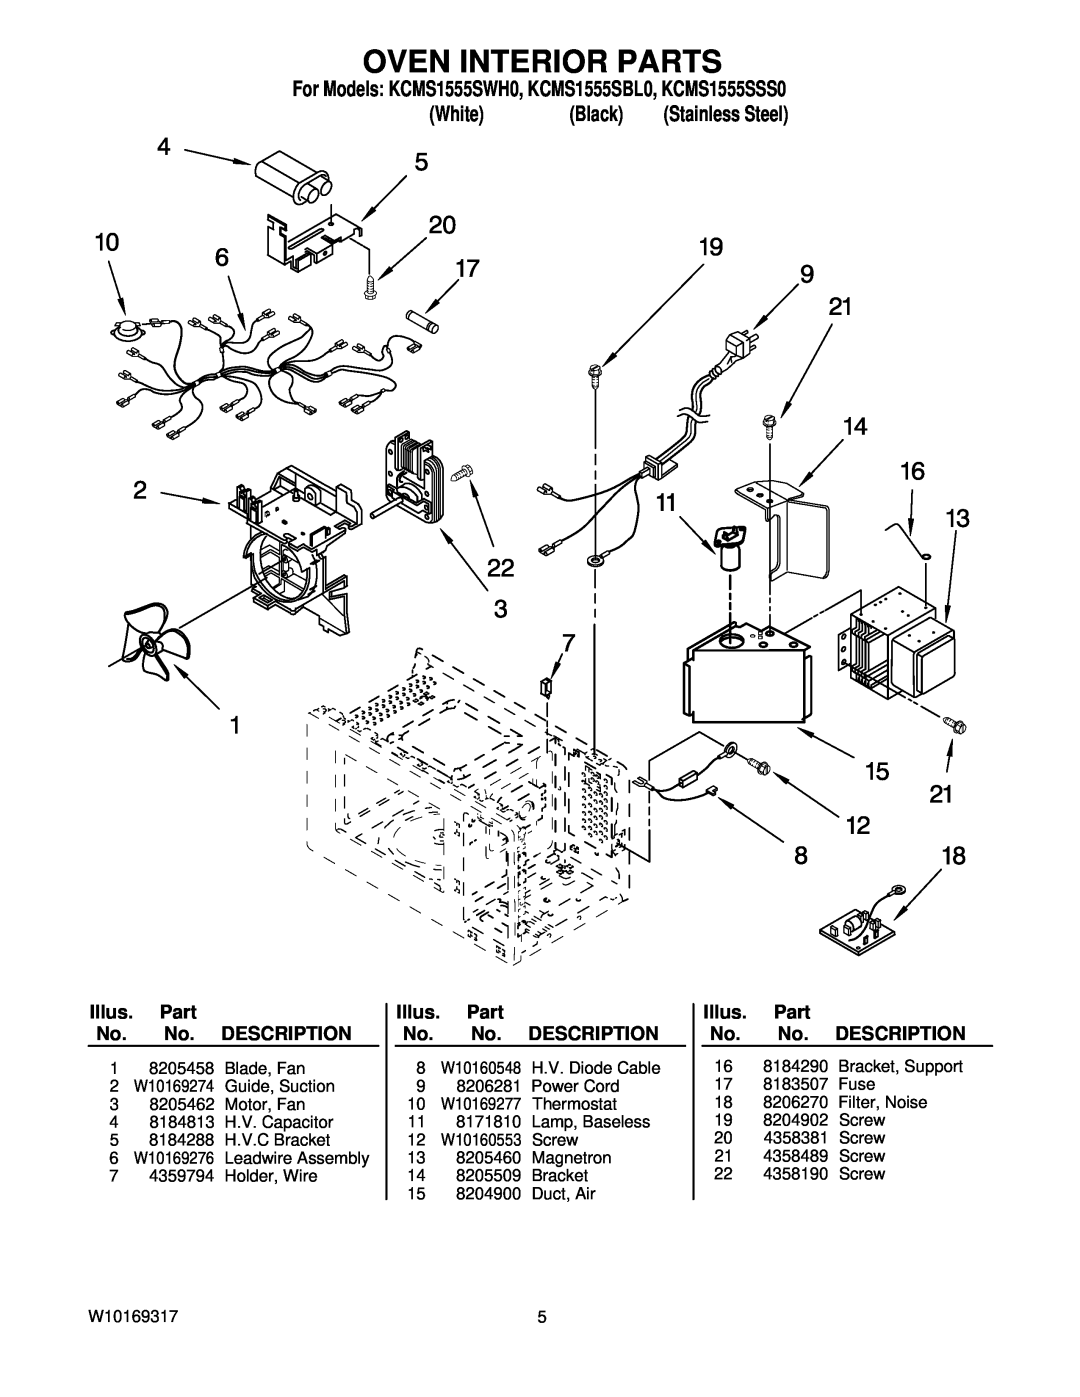 KitchenAid manual Oven Interior Parts, For Models KCMS1555SWH0, KCMS1555SBL0, KCMS1555SSS0, White, Black 